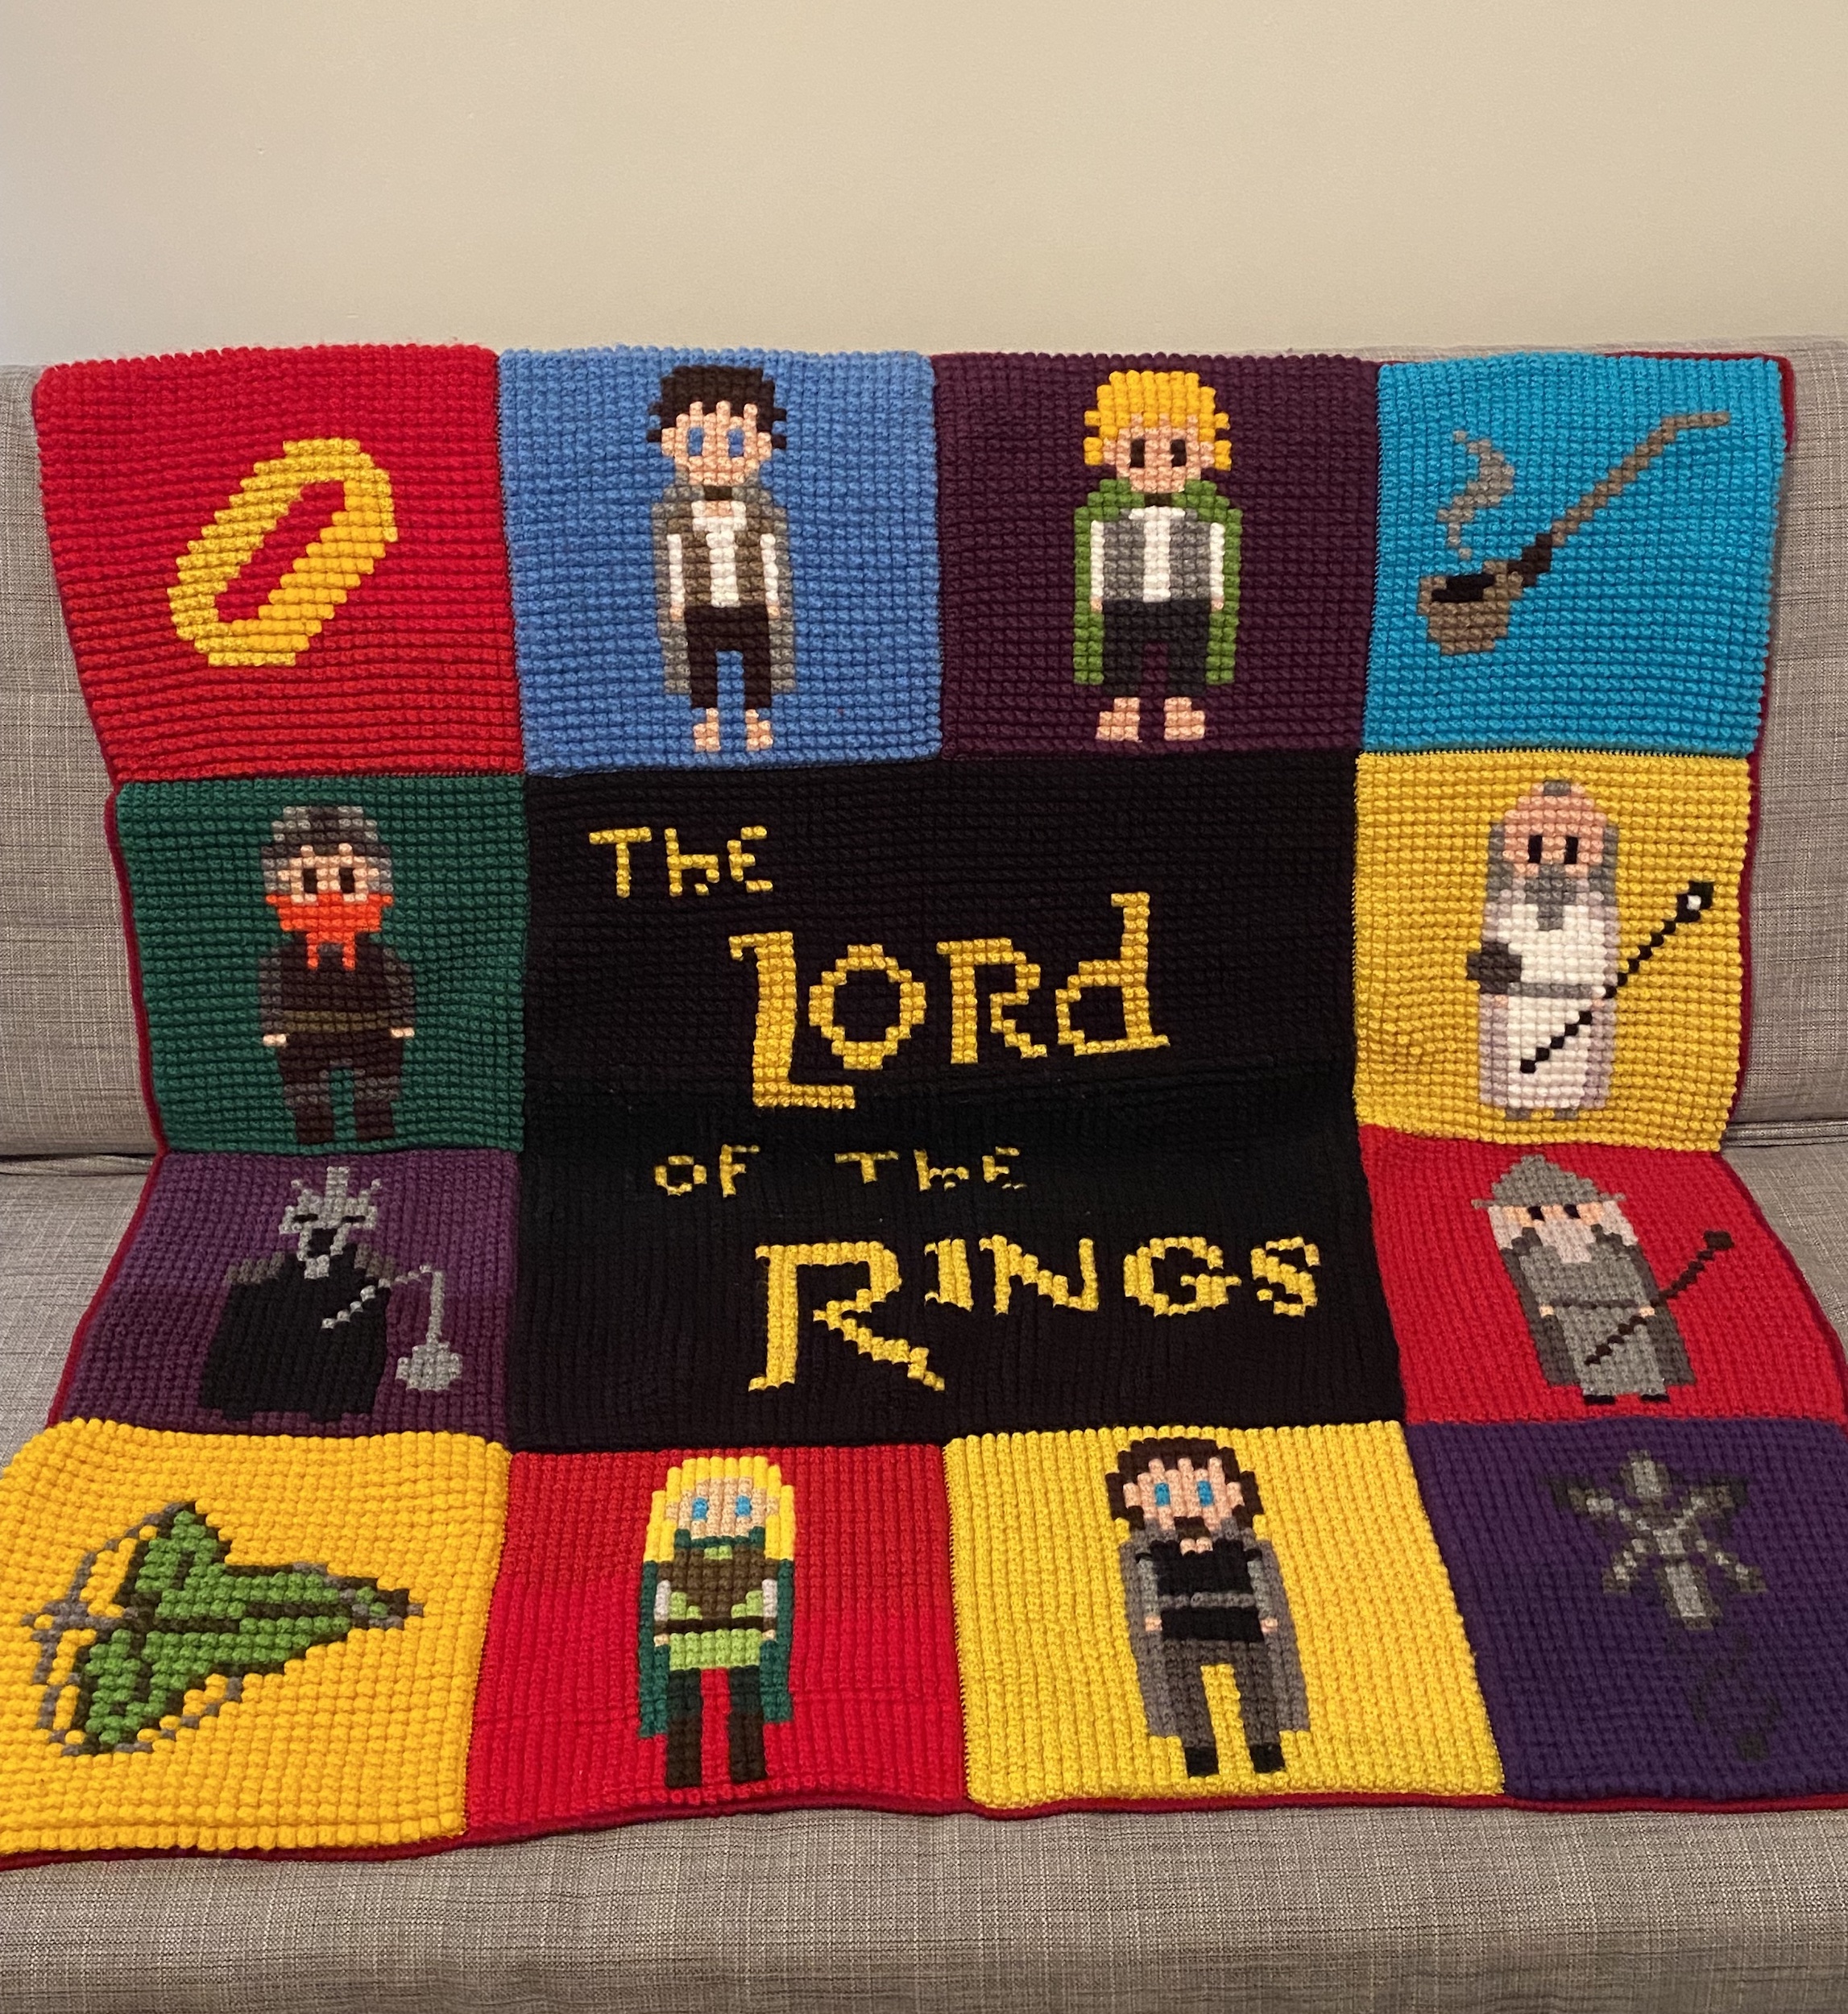 Lord of the Rings Inspired Crochet Graphghan Patterns – tagged crochet  pattern – Geeky Graphghans